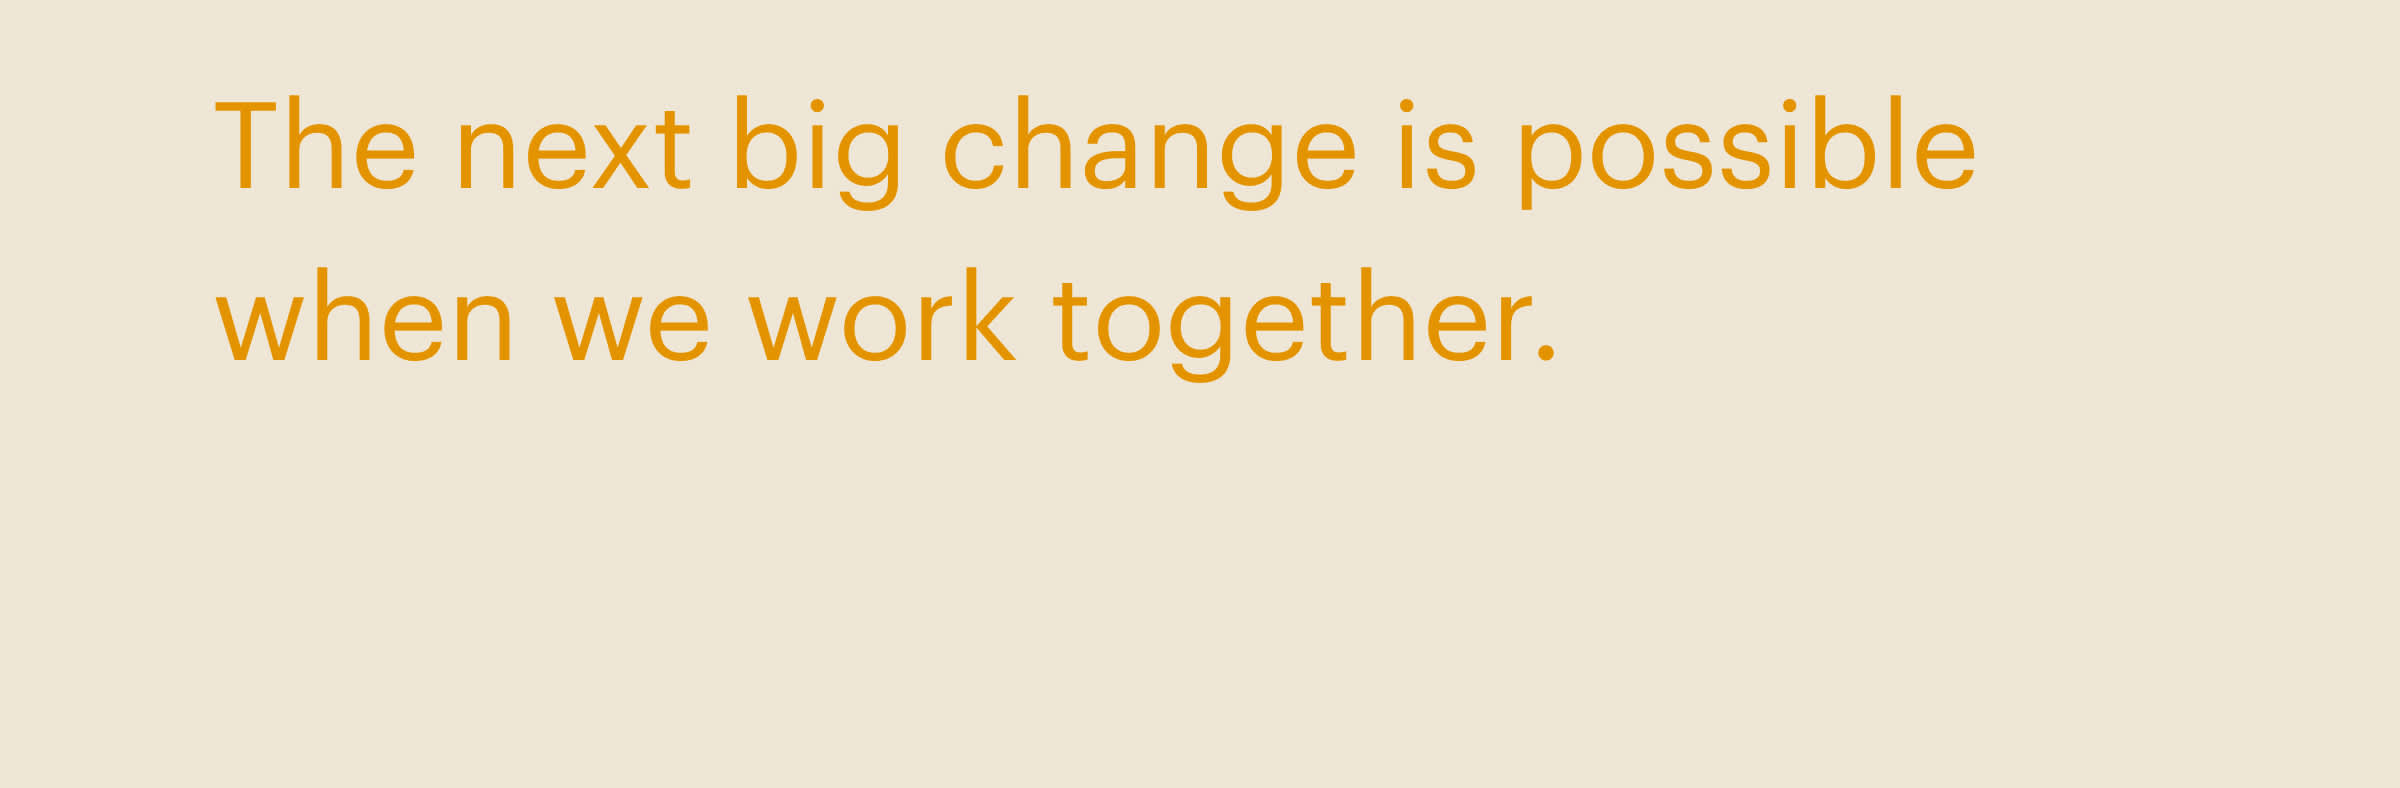 The next big change is possible when we work together